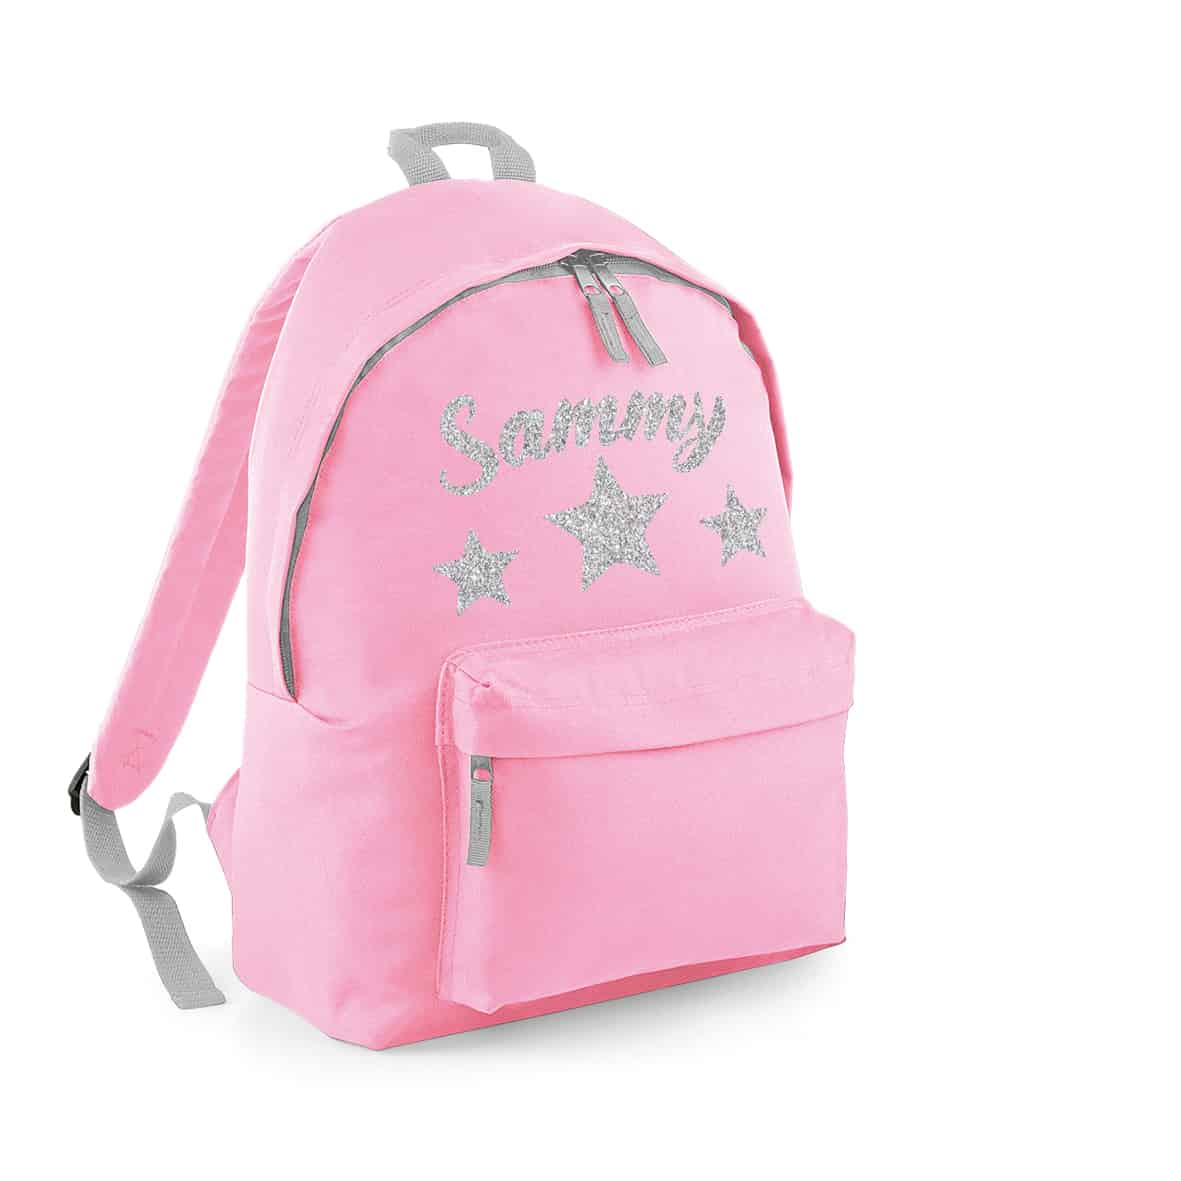 Personalised Name Back Pack - The Dandy Arthouse